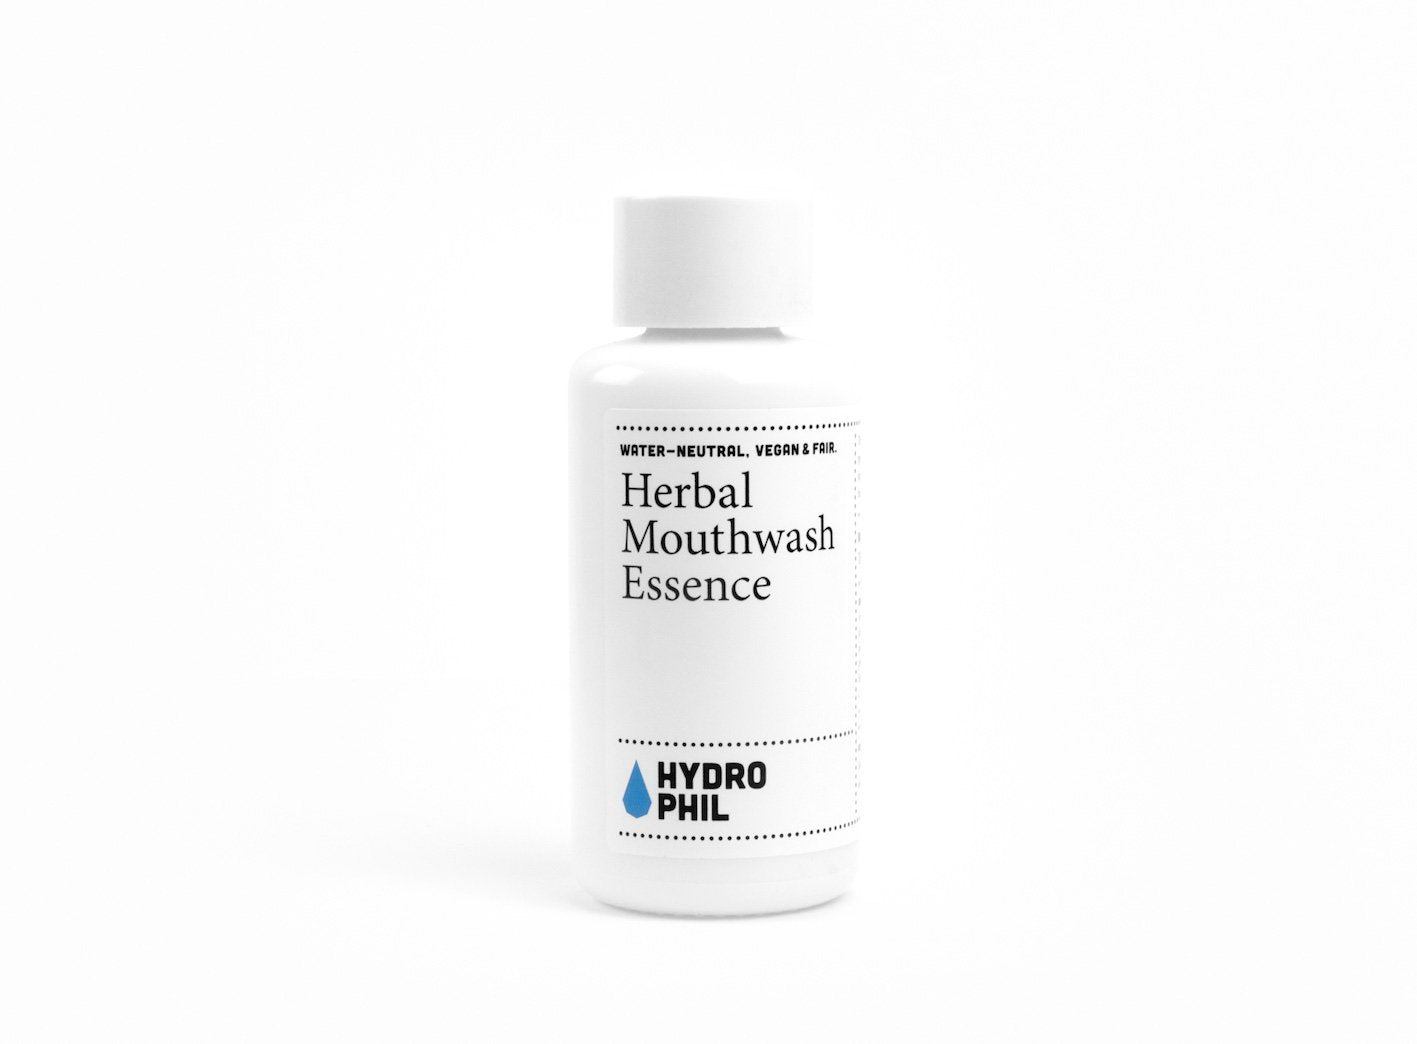 Herbal Mouthwash, by Hydrophil  Mouthwash £14 Eco-friendly, Zero Waste The Contented Company